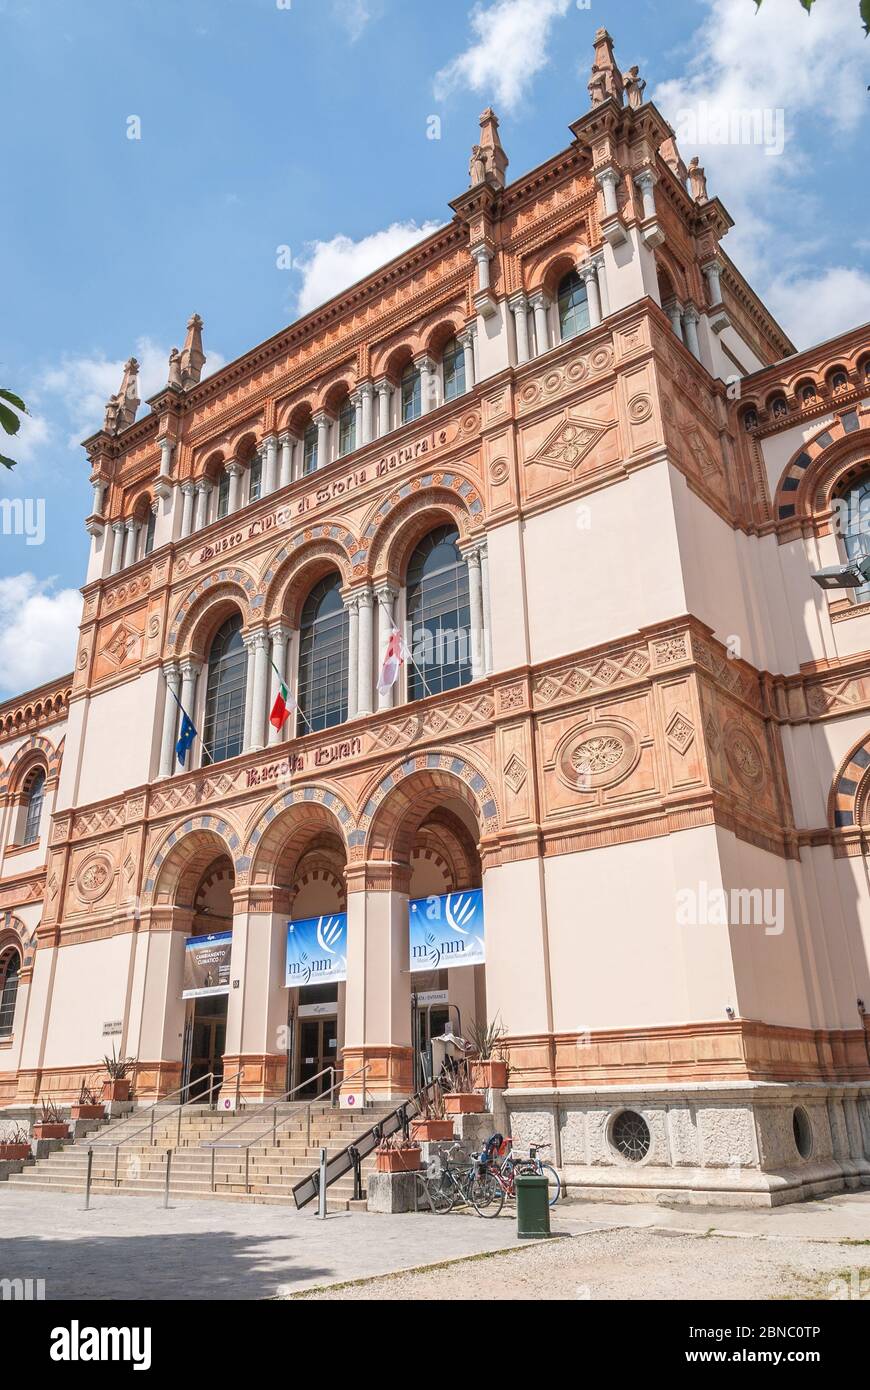 MILAN, ITALY - JUNE 8, 2019 The Museo Civico di Storia Naturale di Milano, Milan Natural History Museum. The museum was founded in 1838 Stock Photo